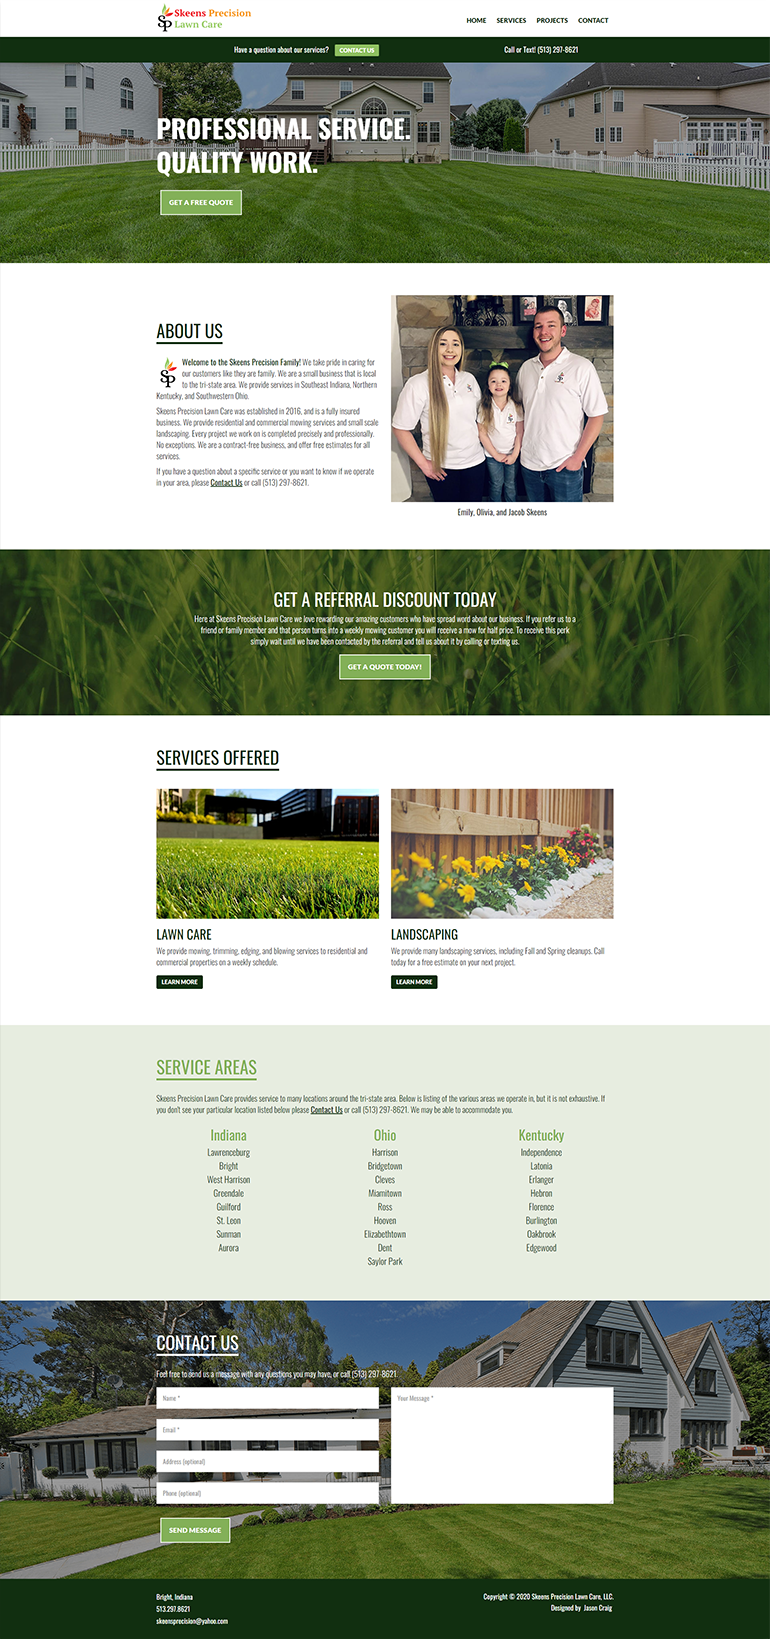 Skeens Precision Lawn Care website homepage layout.